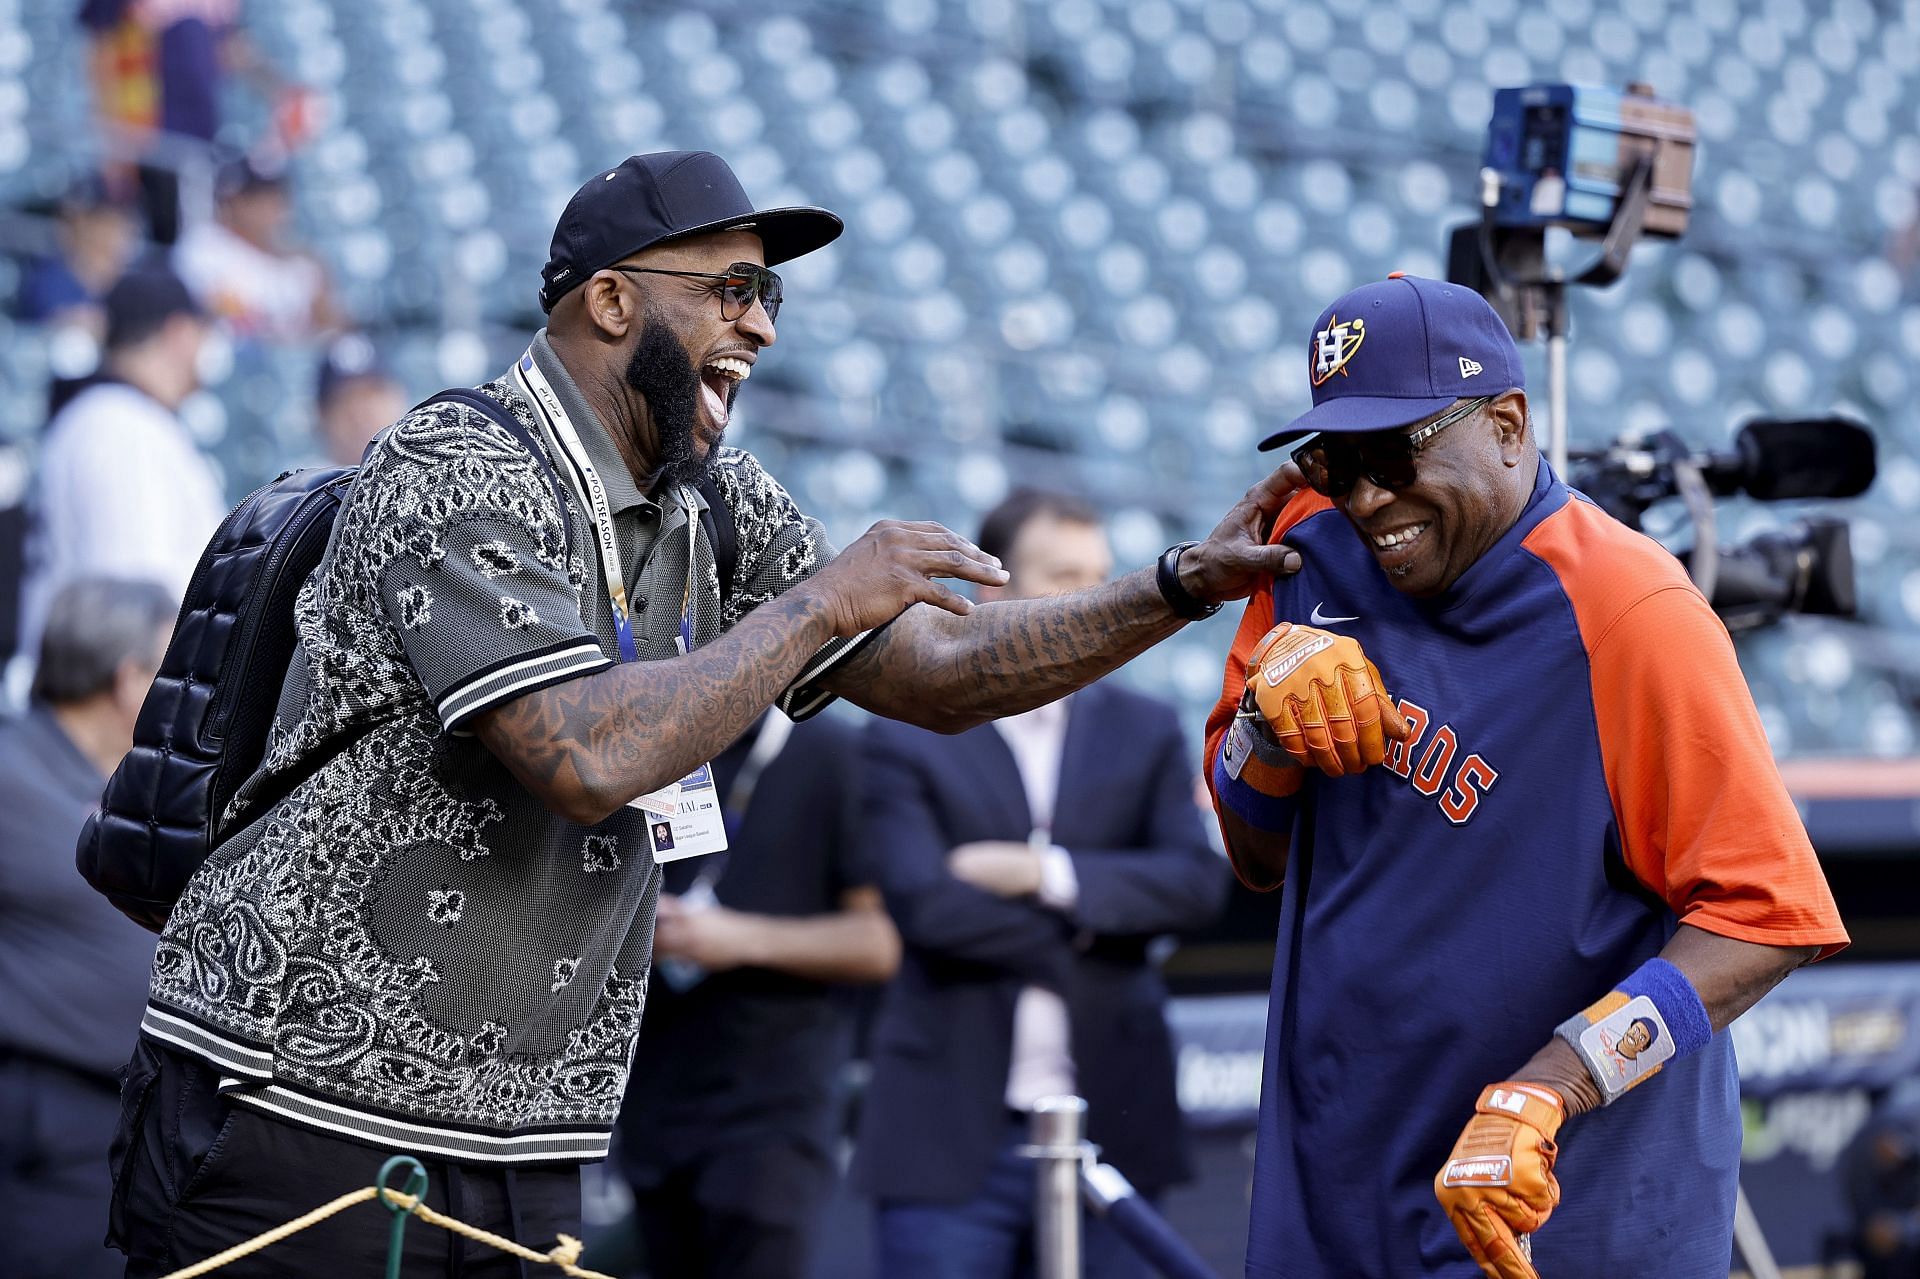 Former New York Yankees pitcher CC Sabathia says he doesn't have a favorite  pitcher: I don't like to watch good pitching, I like to watch home runs